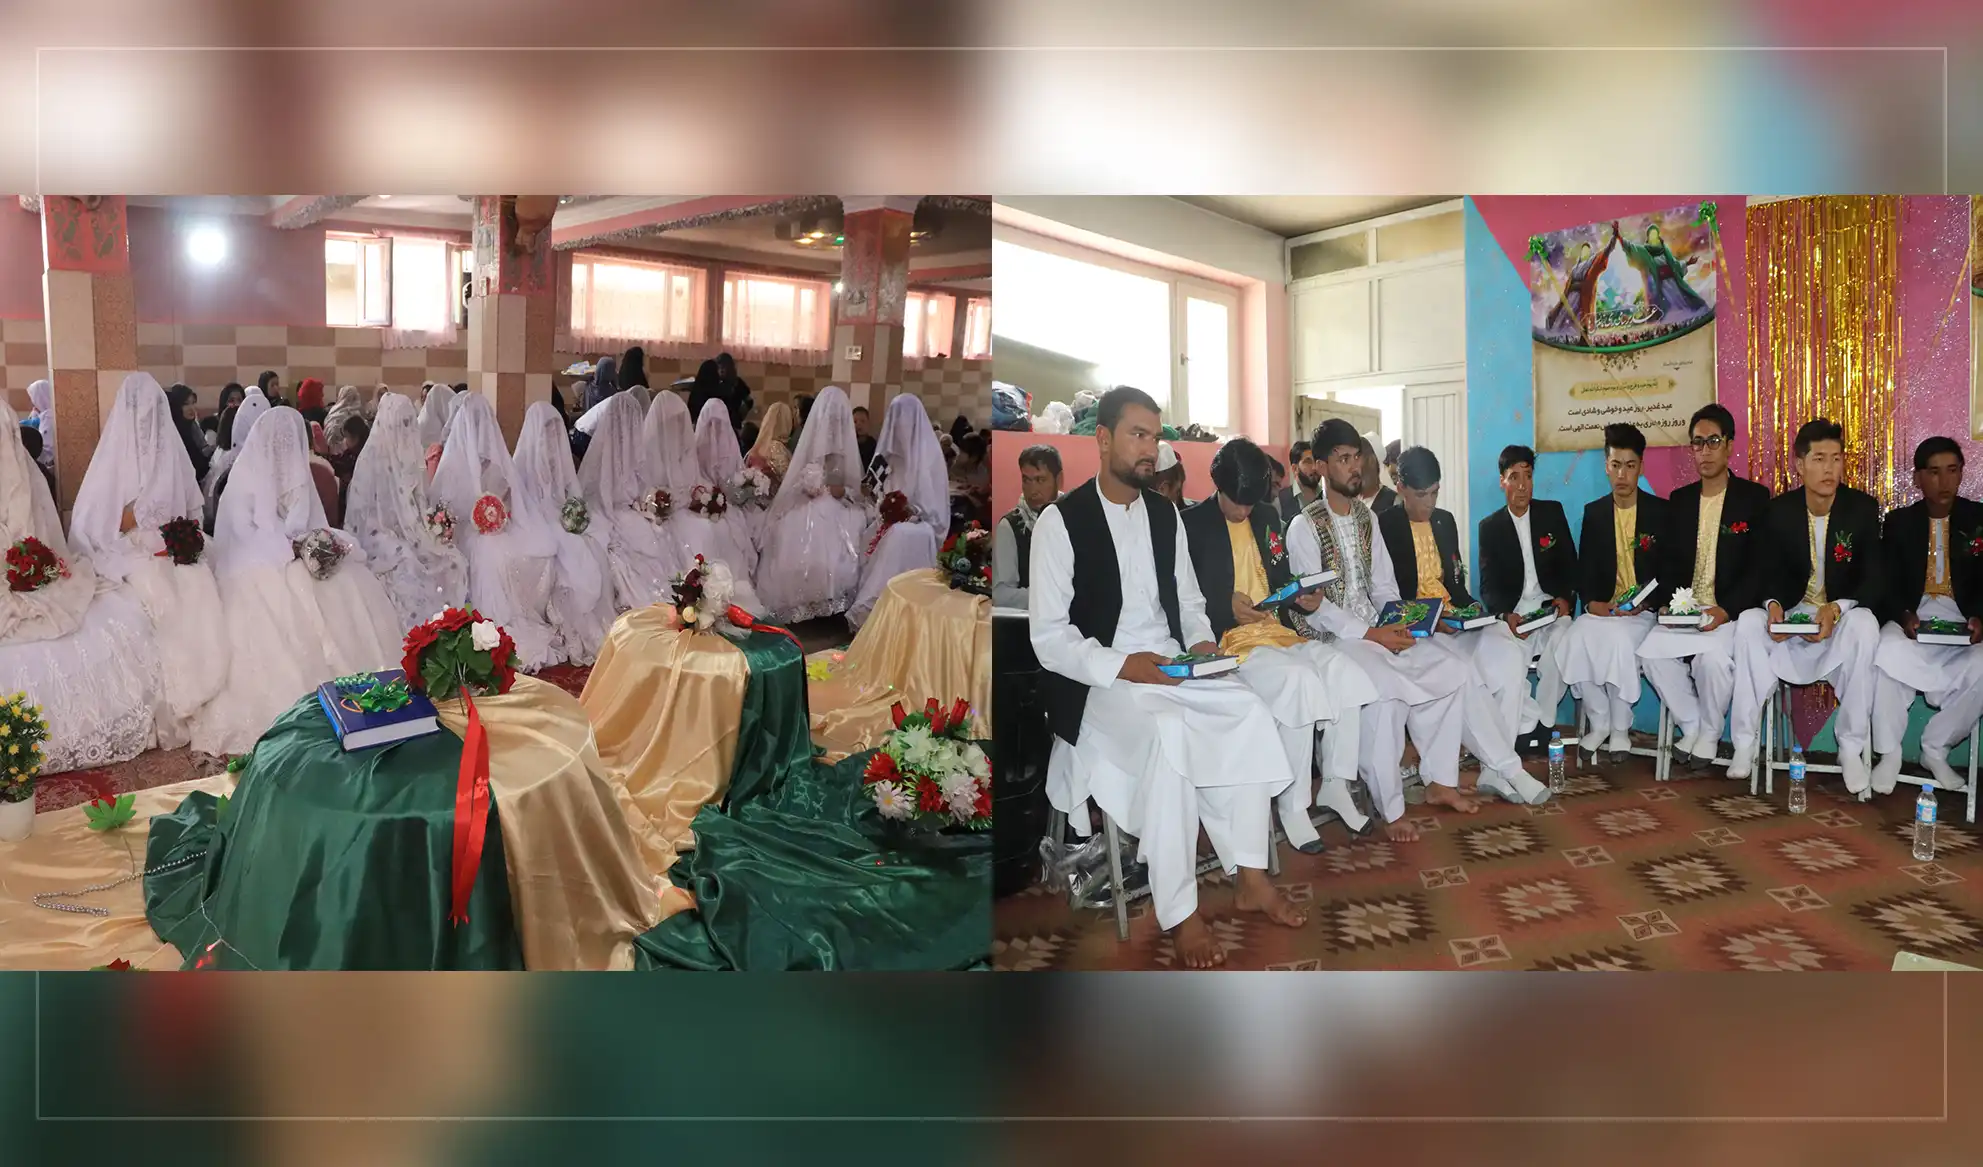 24 couples tie the knot in Ghazni mass wedding ceremony